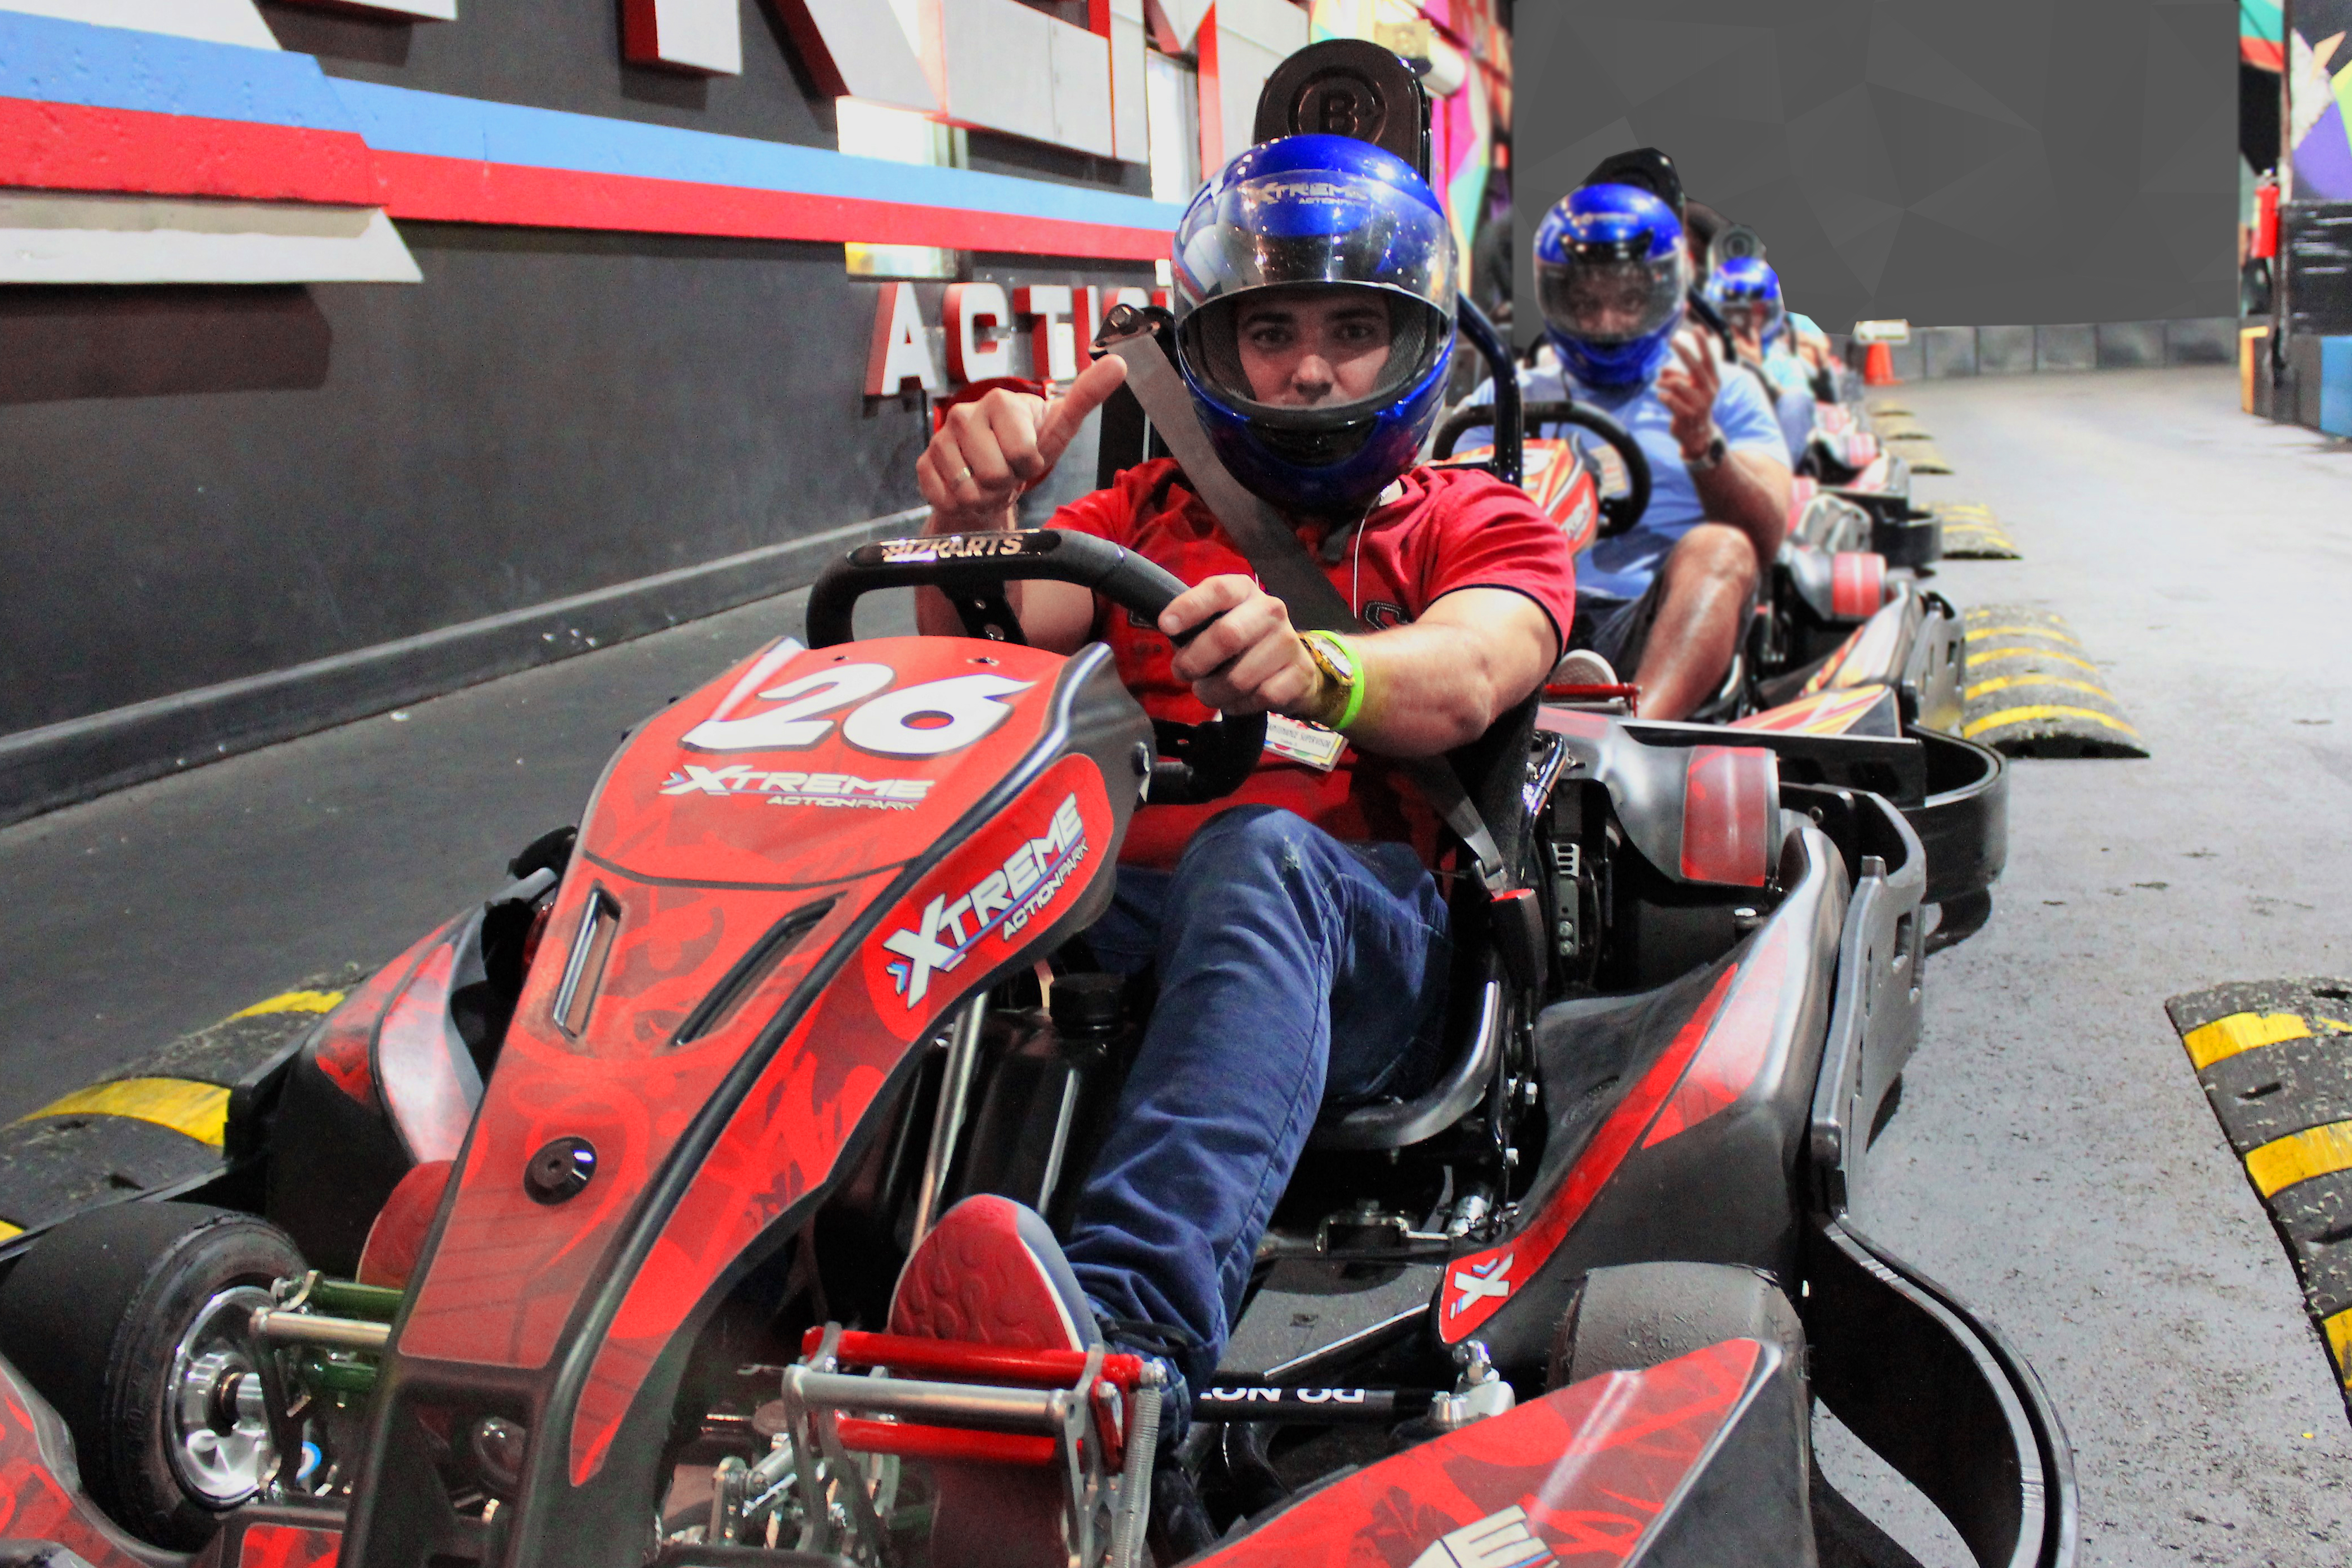 Best go karts to buy if you're getting into the sport